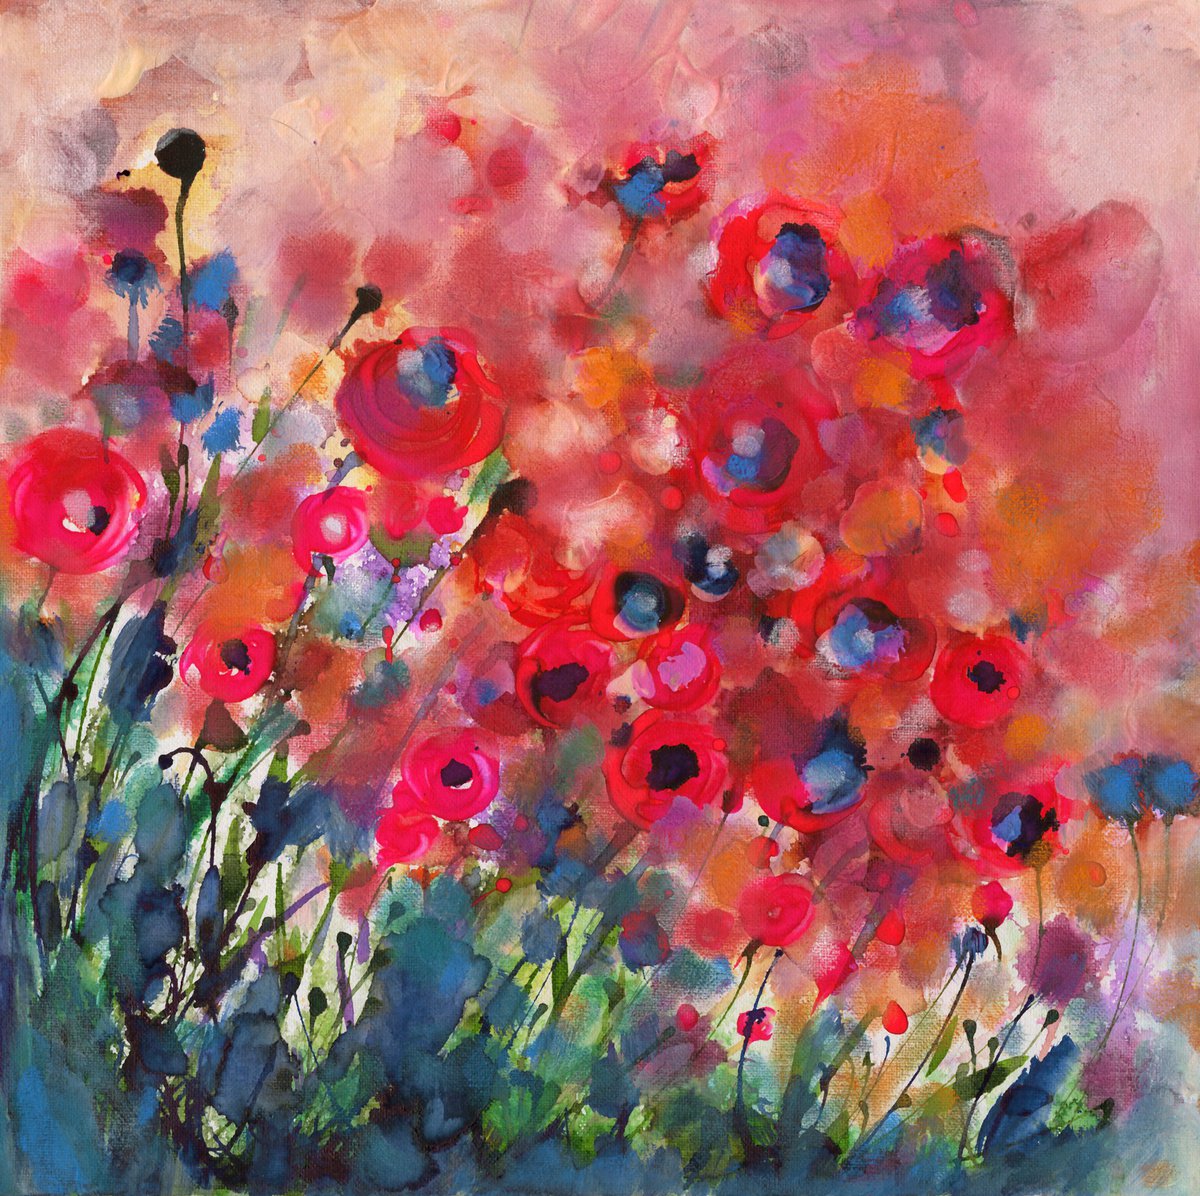 A Day In The Garden 4 - Flower Painting by Kathy Morton Stanion by Kathy Morton Stanion